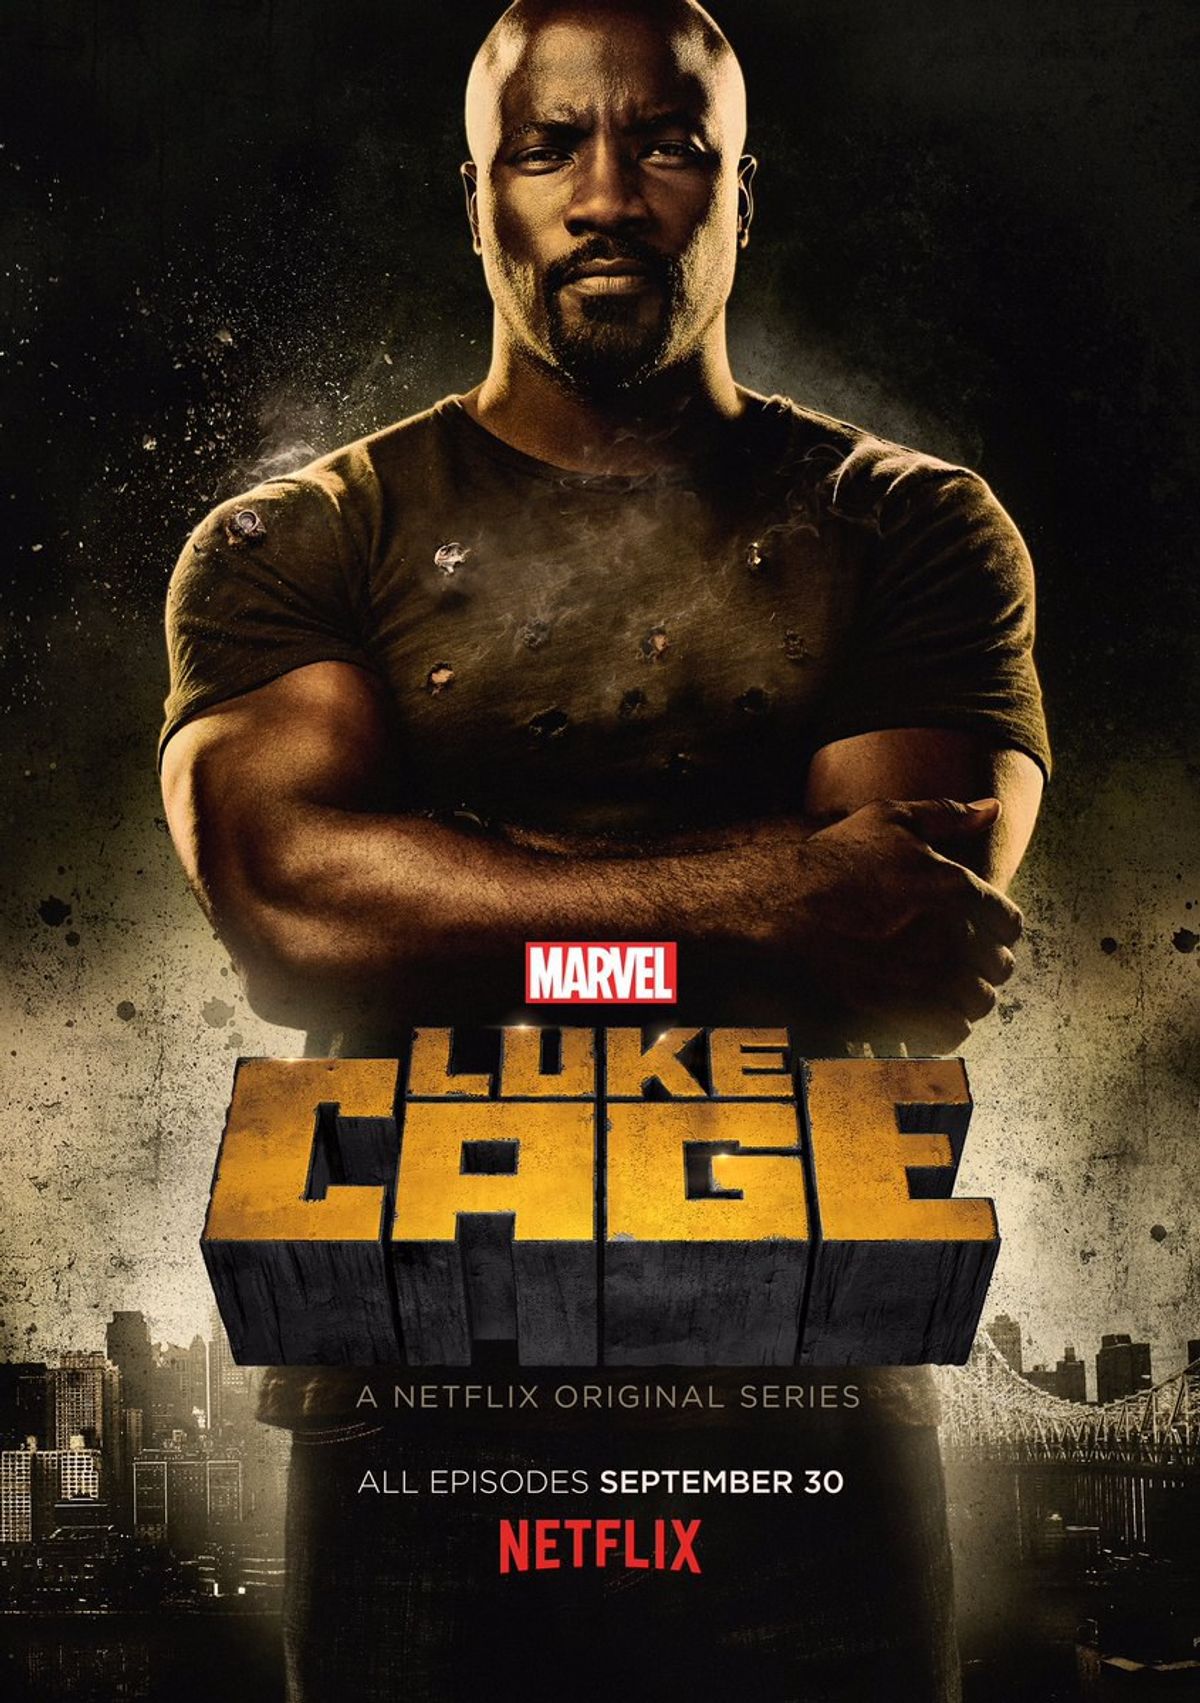 A First Look From A "Luke Cage" Fan's Perspective